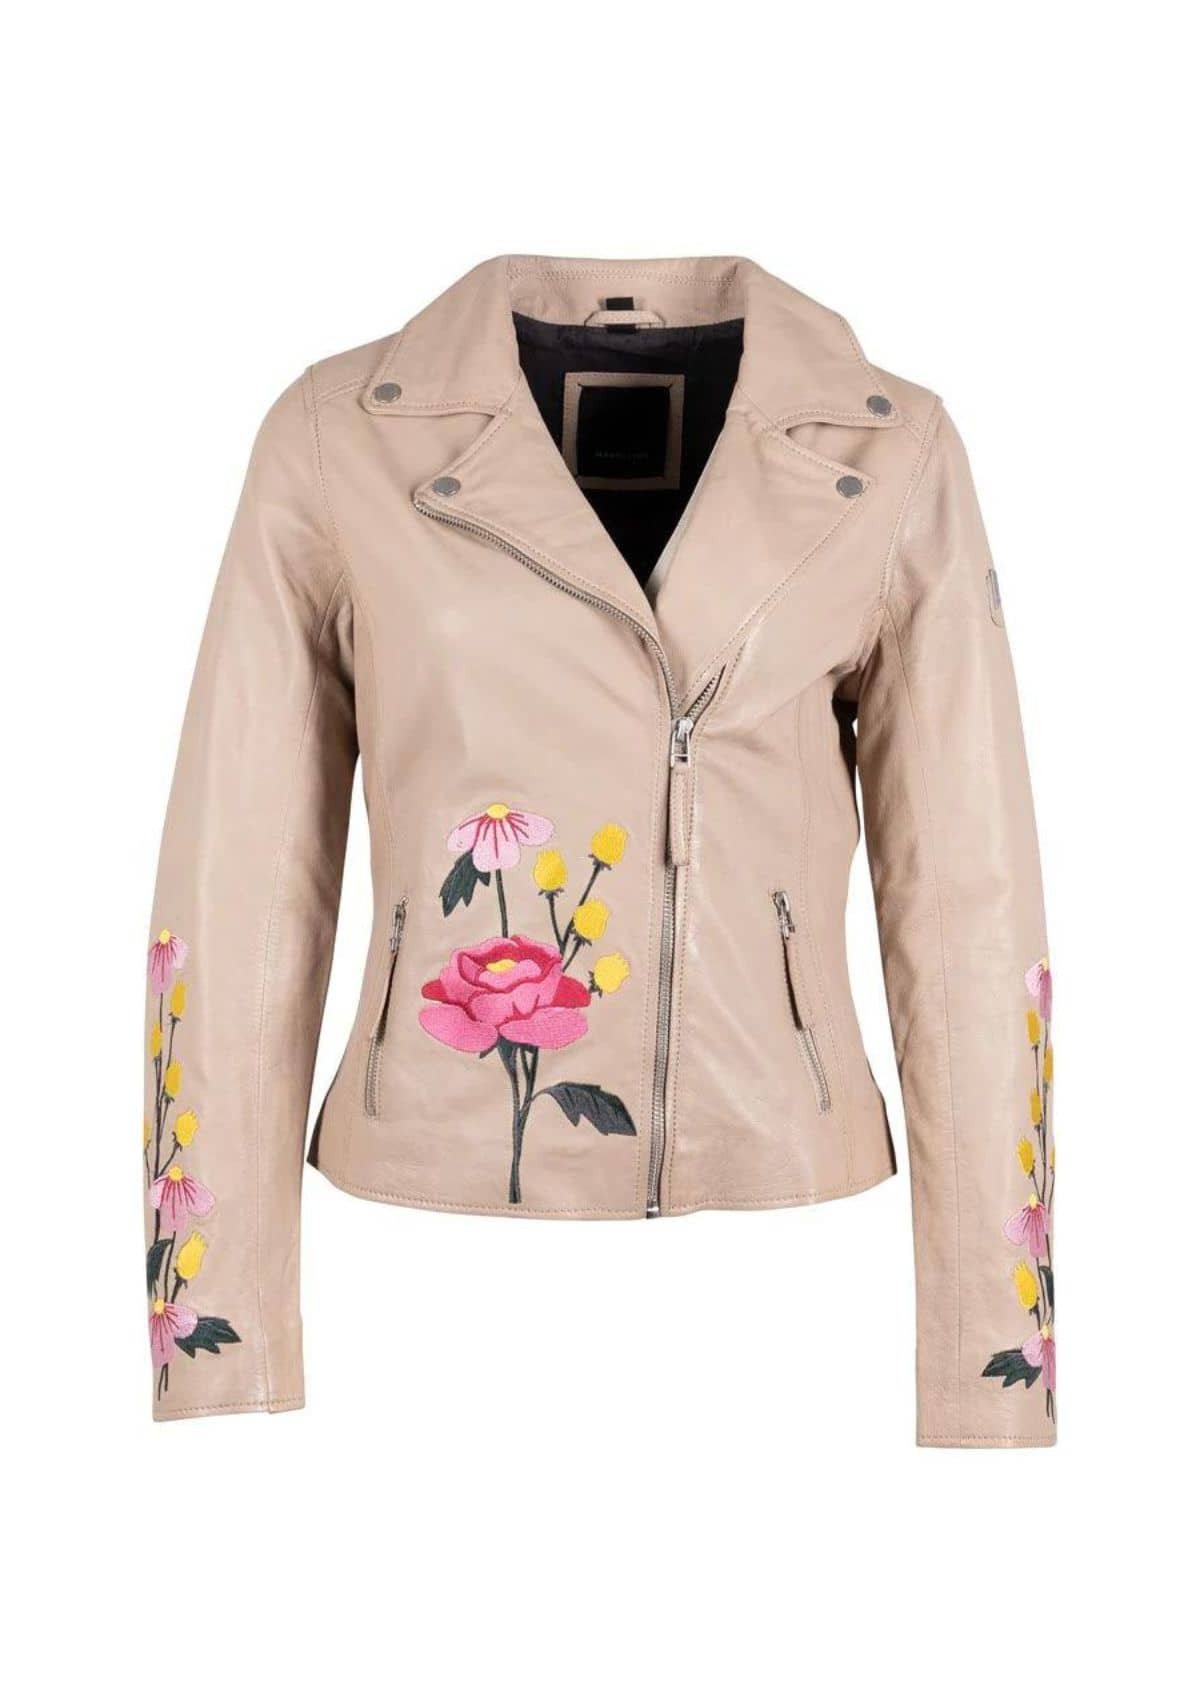 Peonie Floral Leather Jacket - Light Beige -Mauritius GmbH Int. Fashion- Ruby Jane-